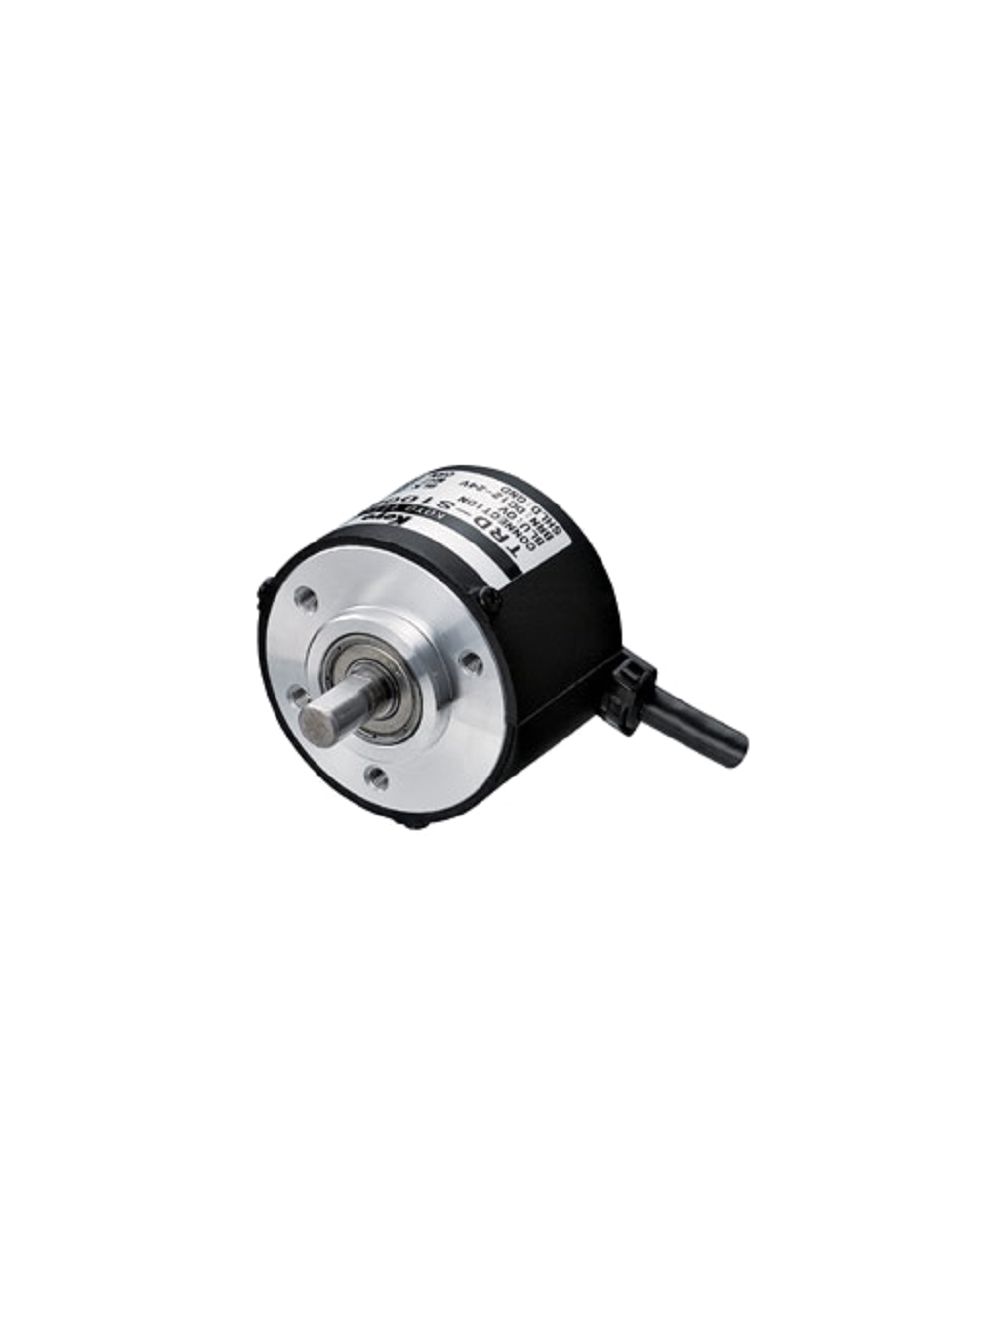 New In stock for sale, KOYO Solid-shaft Incremental Rotary Encoder TRD-S200B